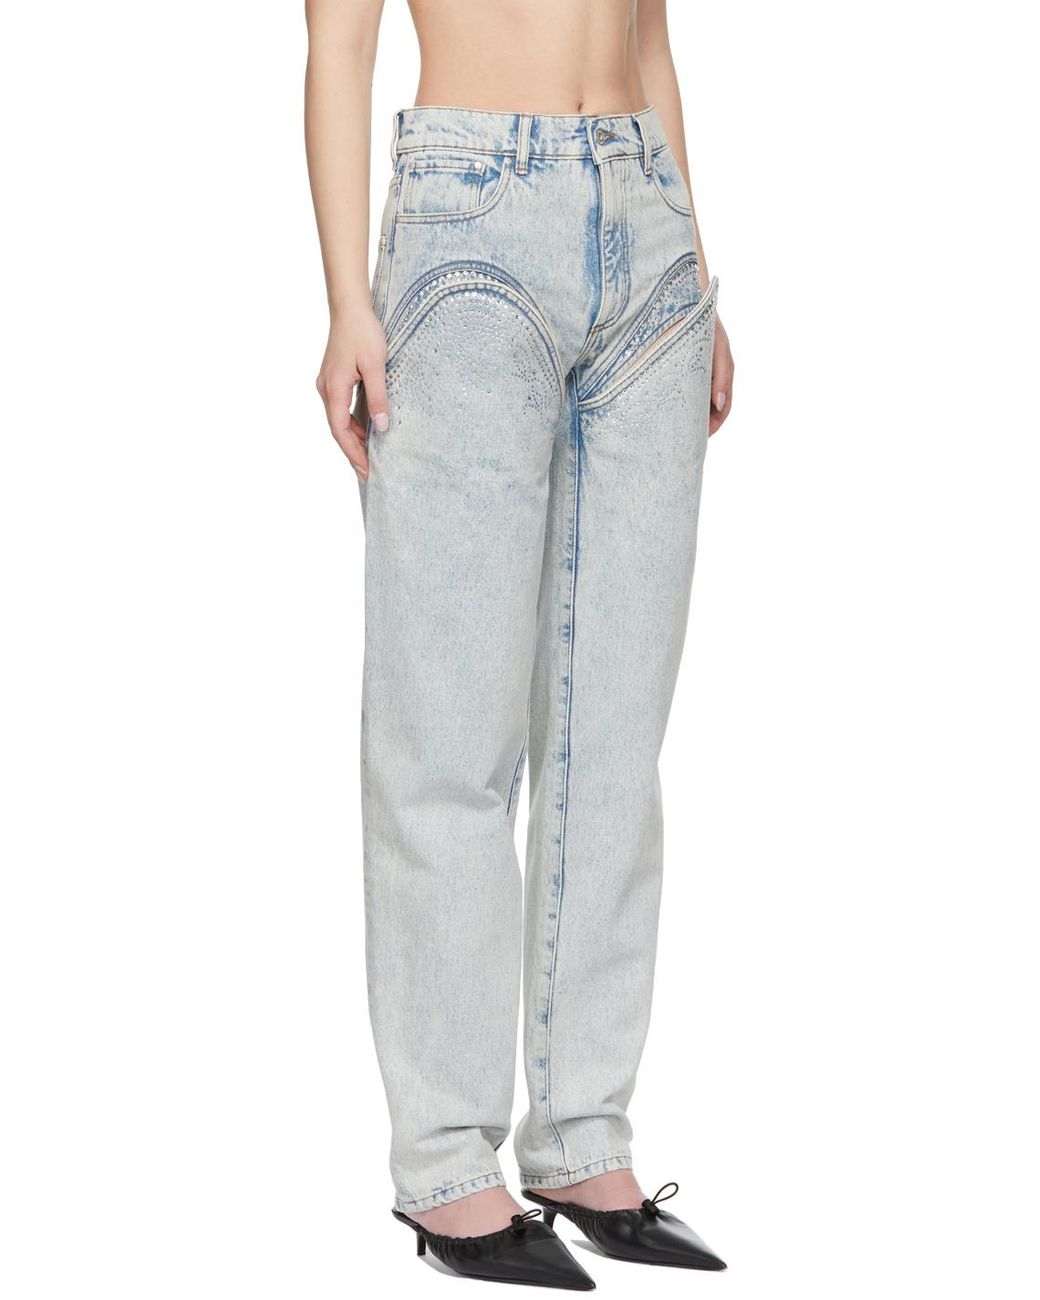 Y. Project Cut Out Rhinestone Jeans in Gray